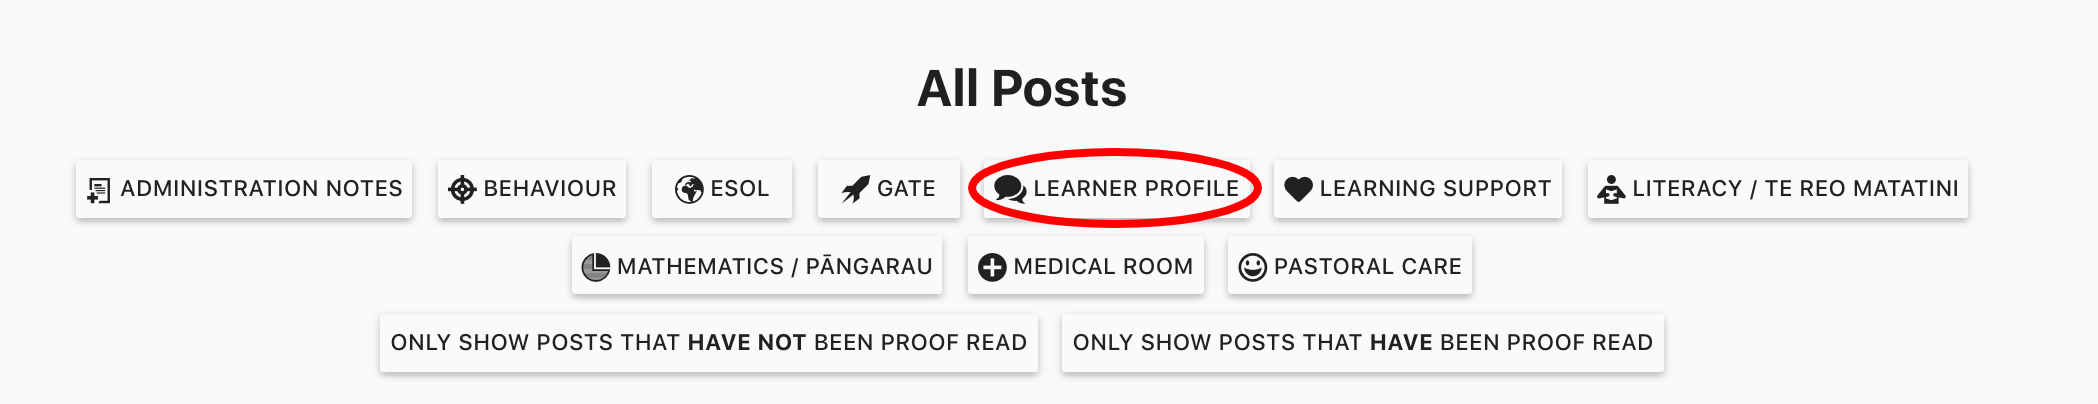 All_posts_Learner_profile.png